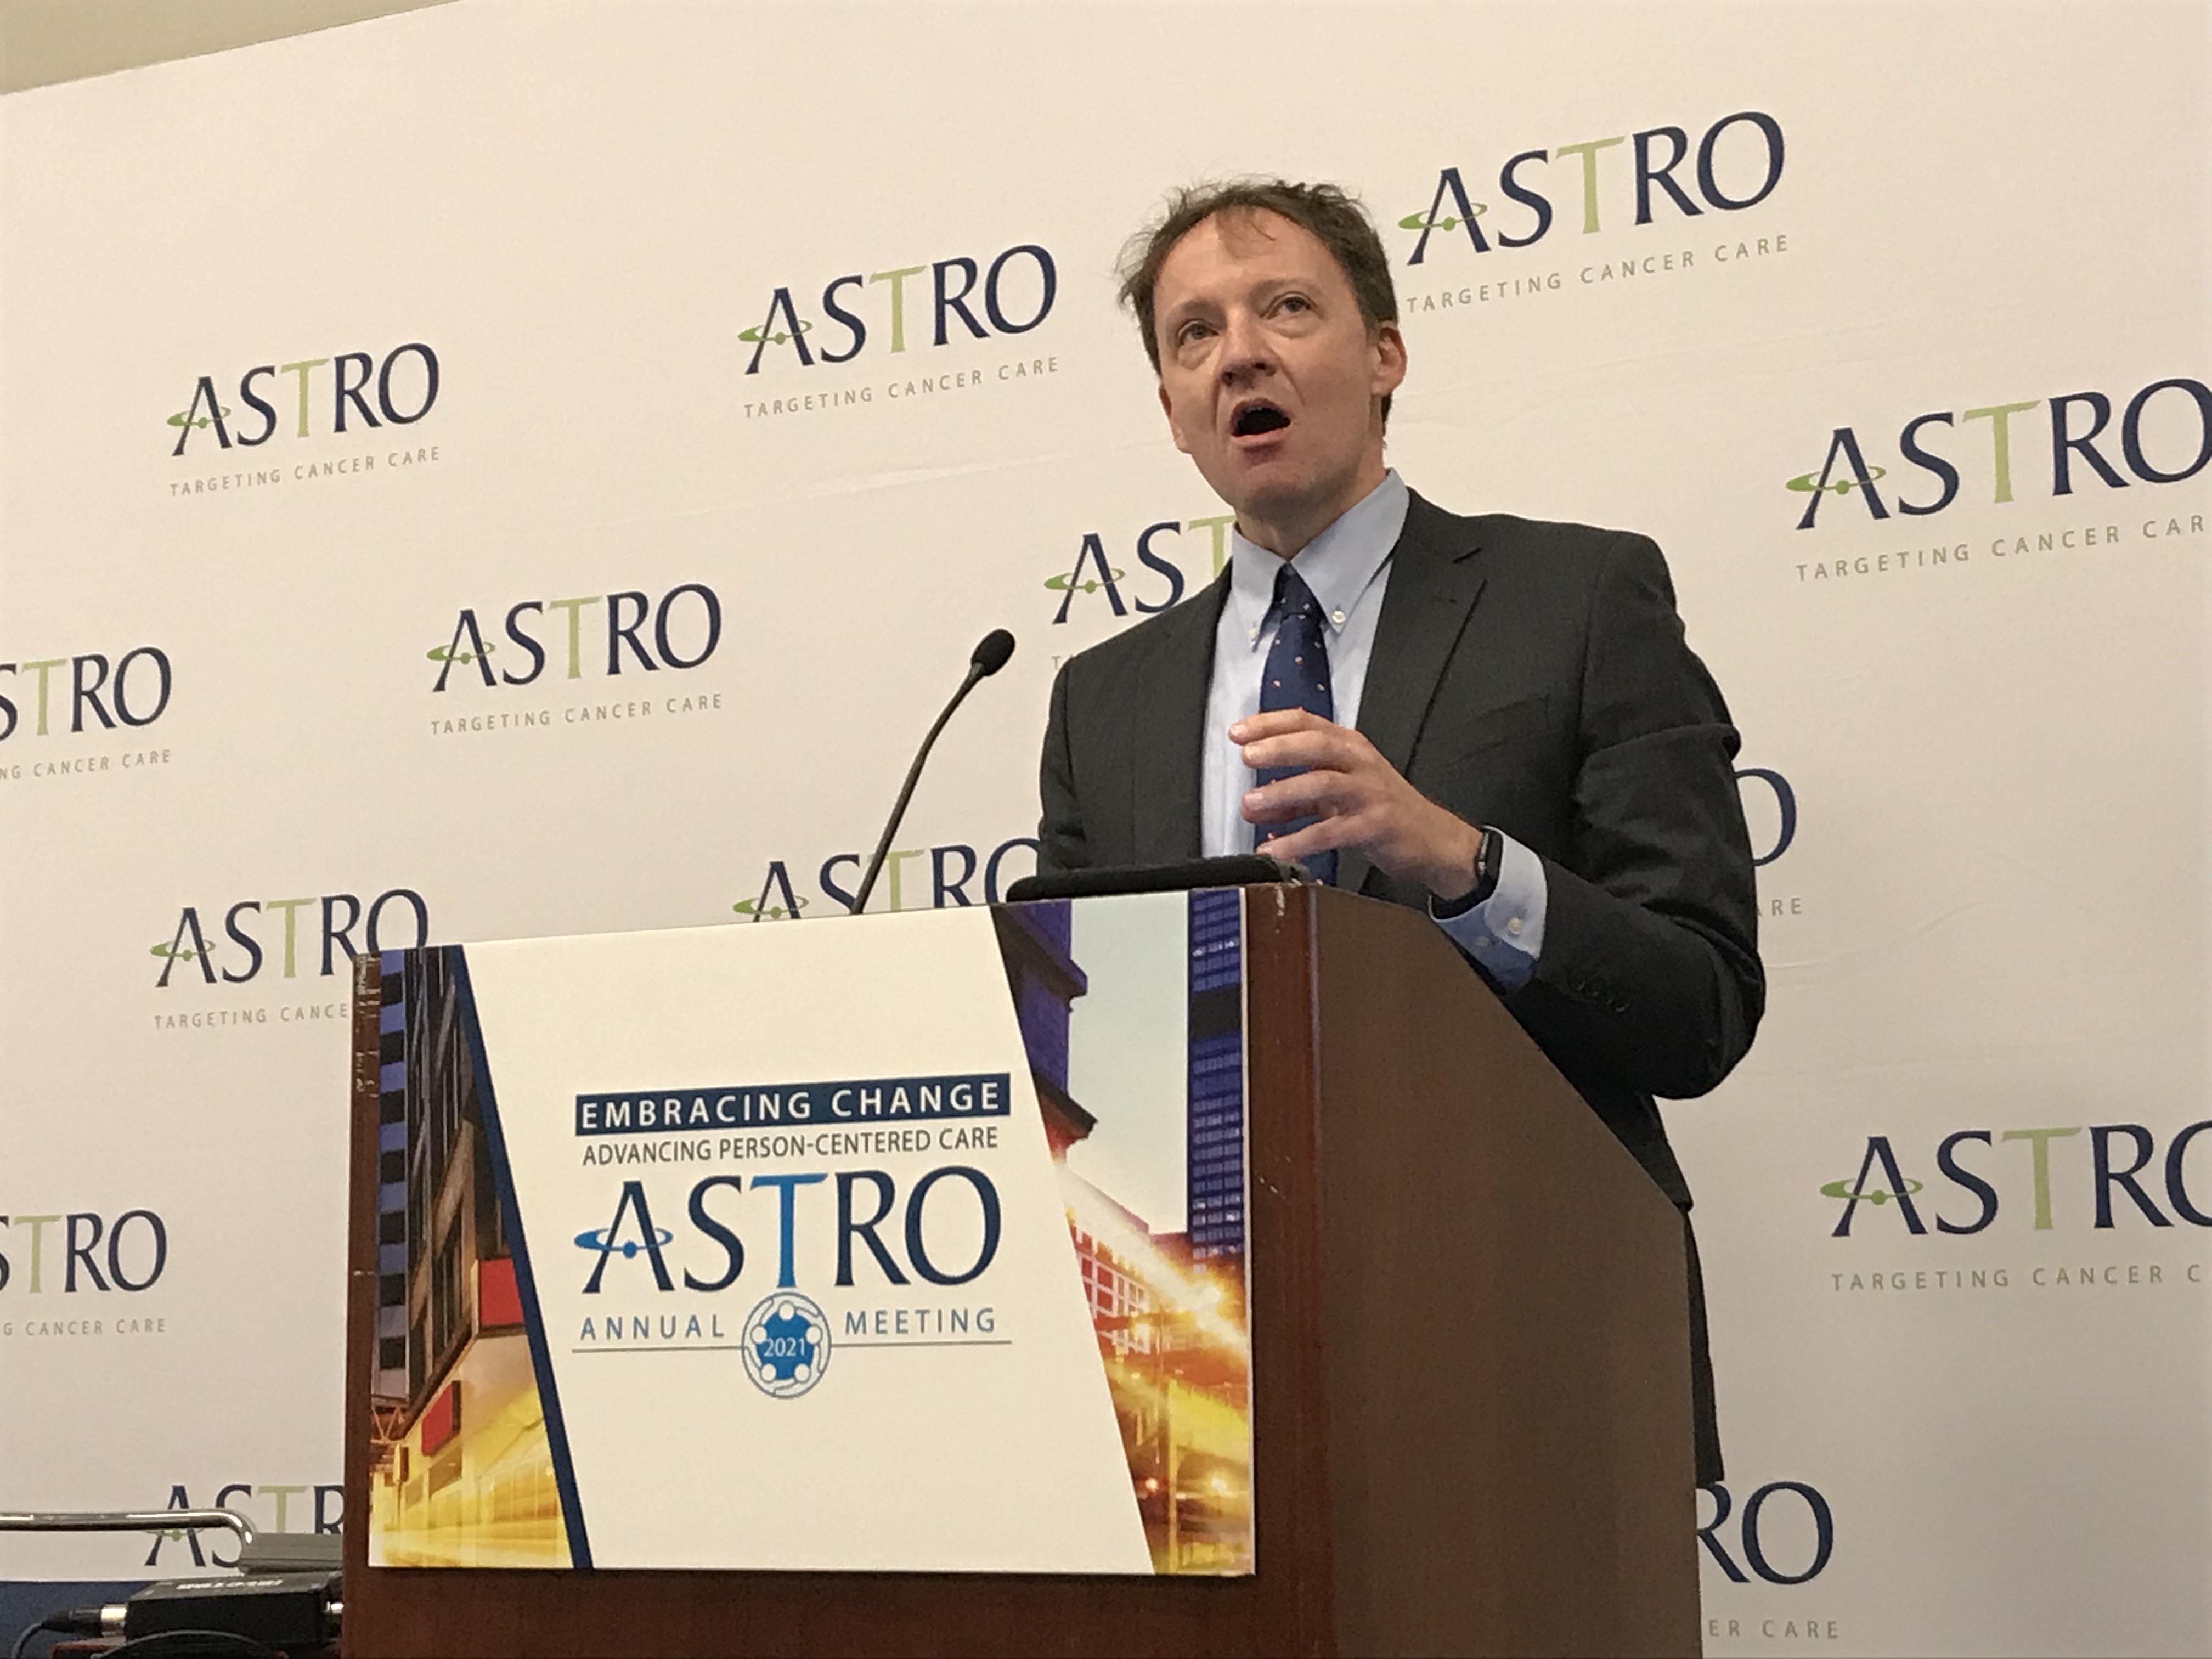 Steven Chmura, M.D., Ph.D., University of Chicago, speaks at an ASTRO 2021 press conference on the results of a phase 1 clinical trial testing the effects of stereotactic body radiotherapy for treating multiple metastases. His study determined that treatments used for single tumors can also be safely used for treating patients with multiple metastases. Read more on this study.